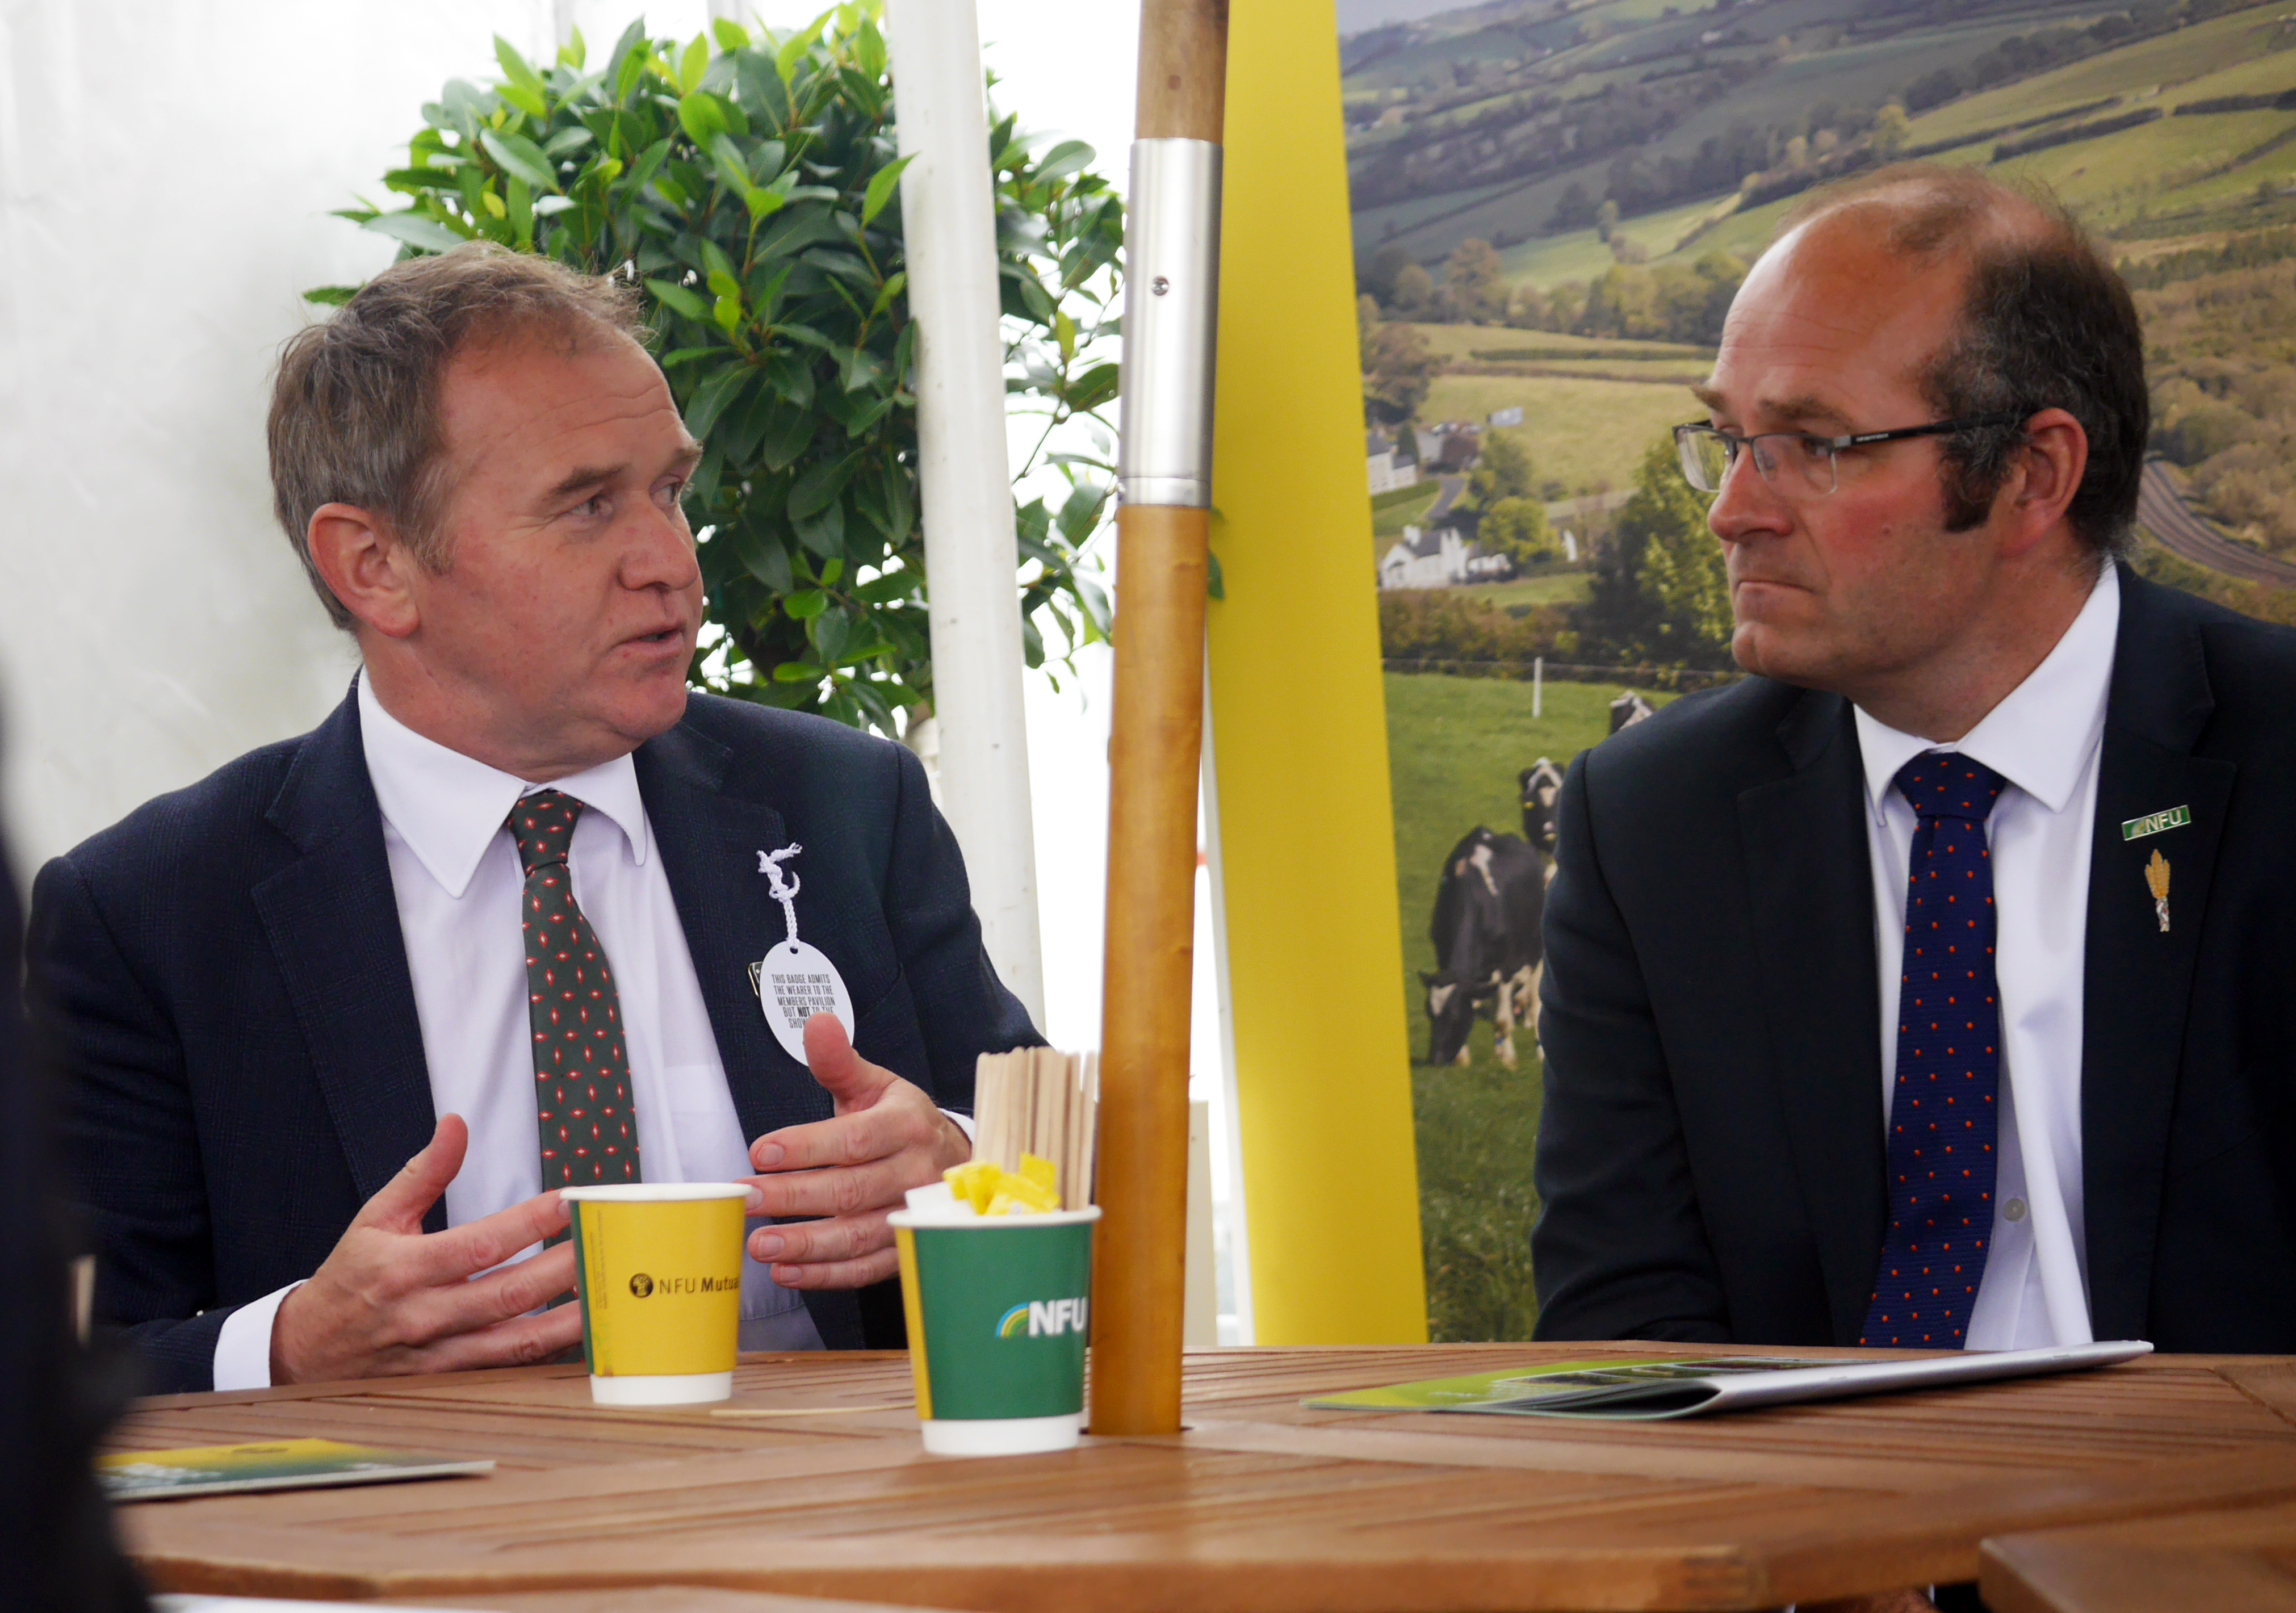 George Eustice talks to Tom Bradshaw at the Royal Cornwall Show